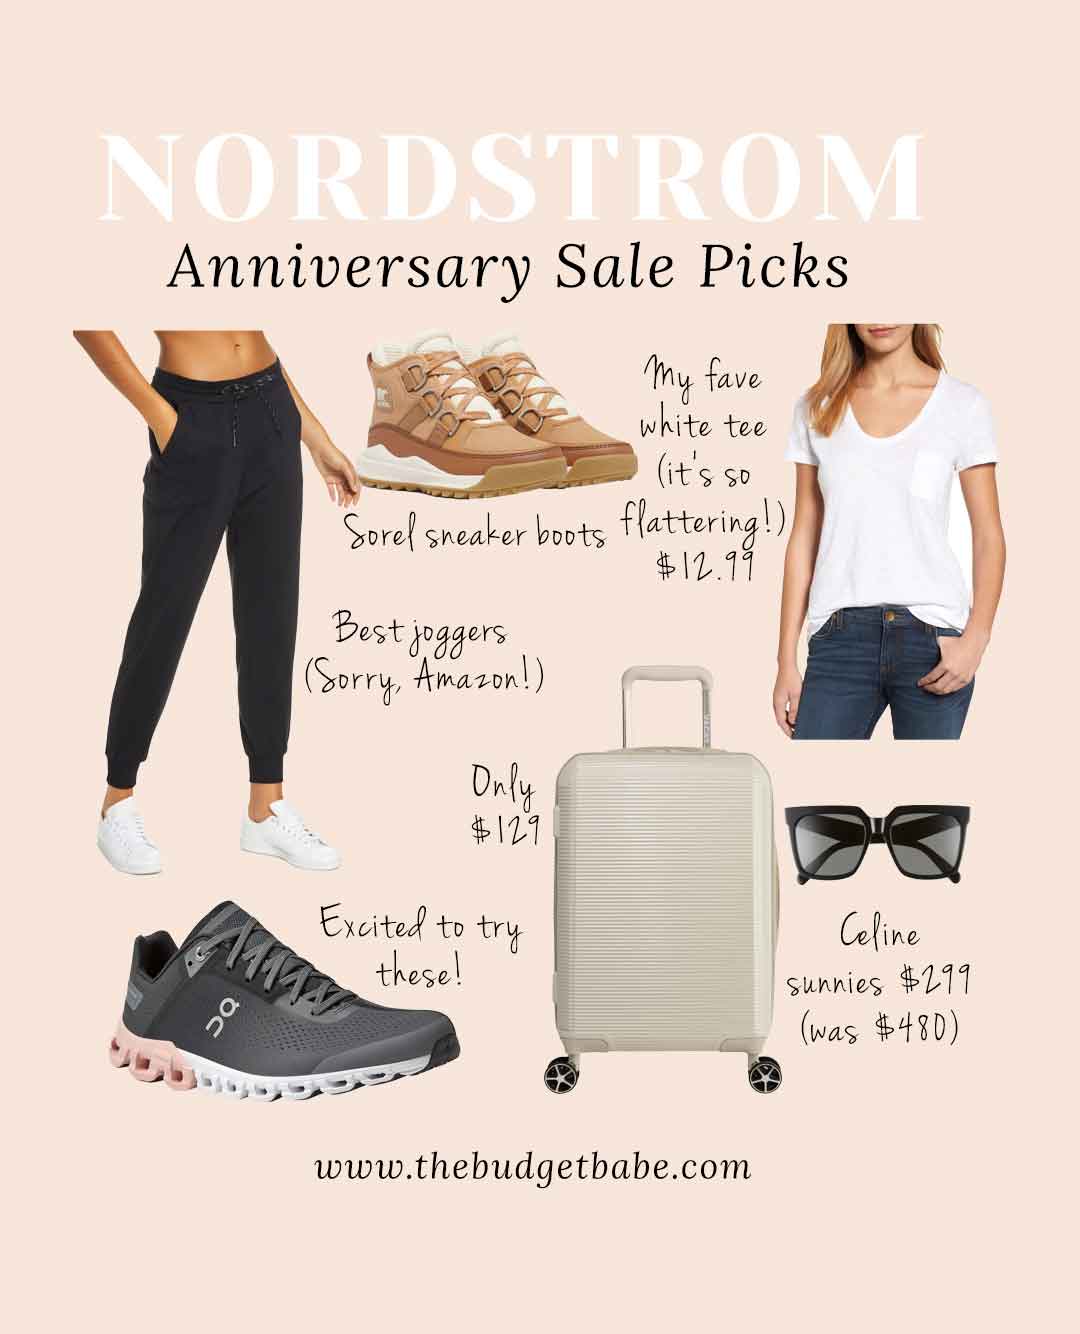 Nordstrom Anniversary Sale kicks off today for cardmembers